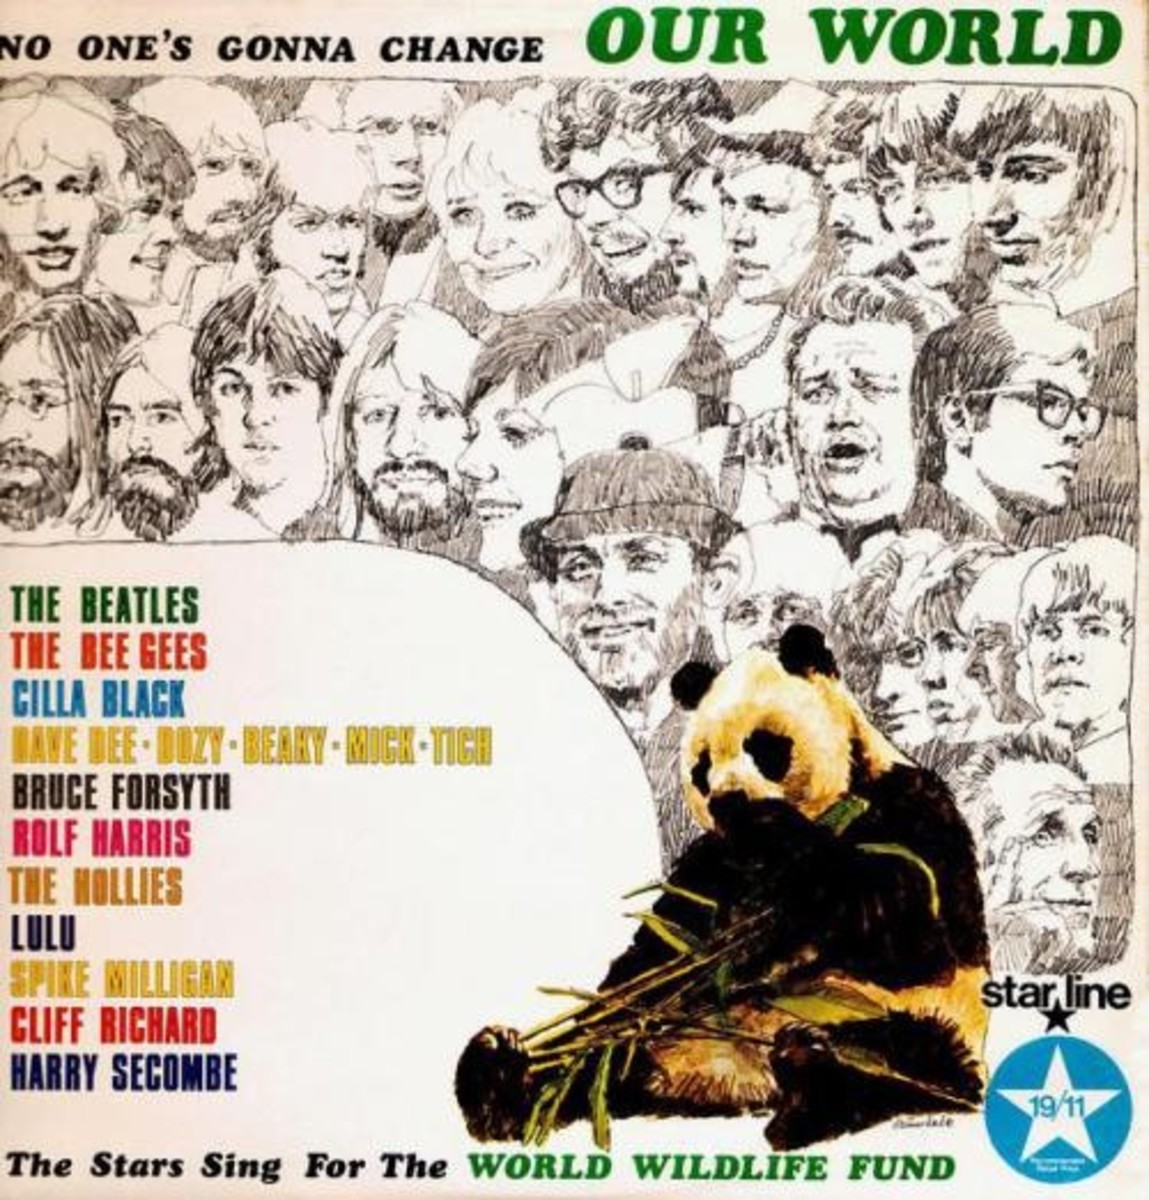 No One's Gonna Change Our World, Charity Album for The World Wildlife Fund